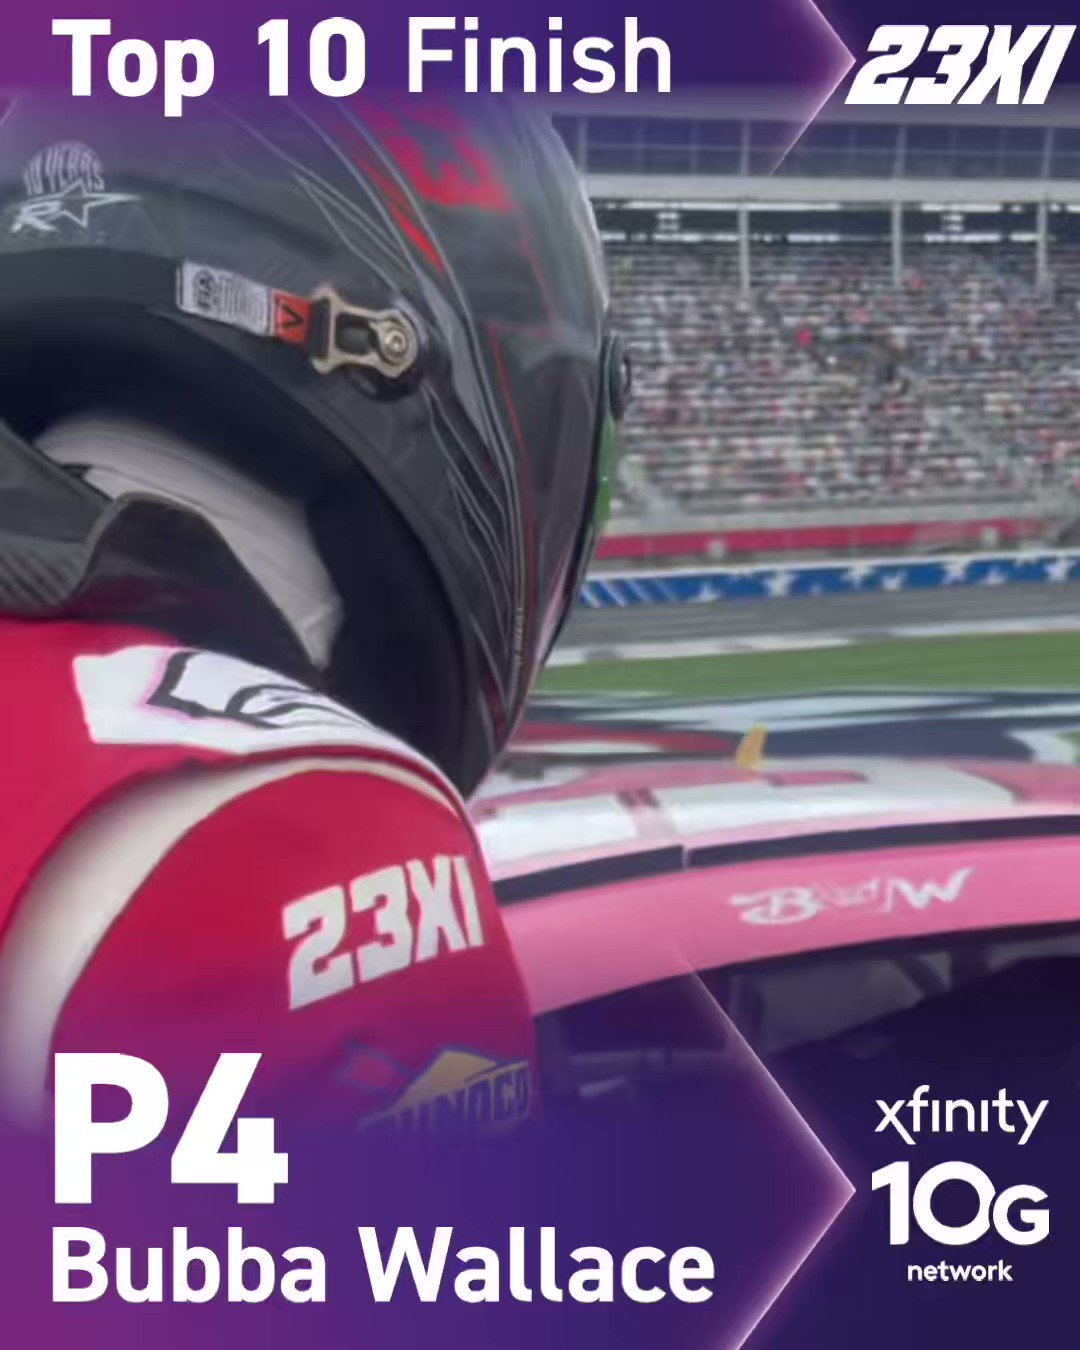 Vil have plukke kaustisk 23XI Racing on Twitter: "Two amazing finishes from our team at home. 🔥  @BubbaWallace and @TylerReddick brought home Top 10 finishes presented by  the Xfinity 10G network. https://t.co/465ax0Py2u" / Twitter